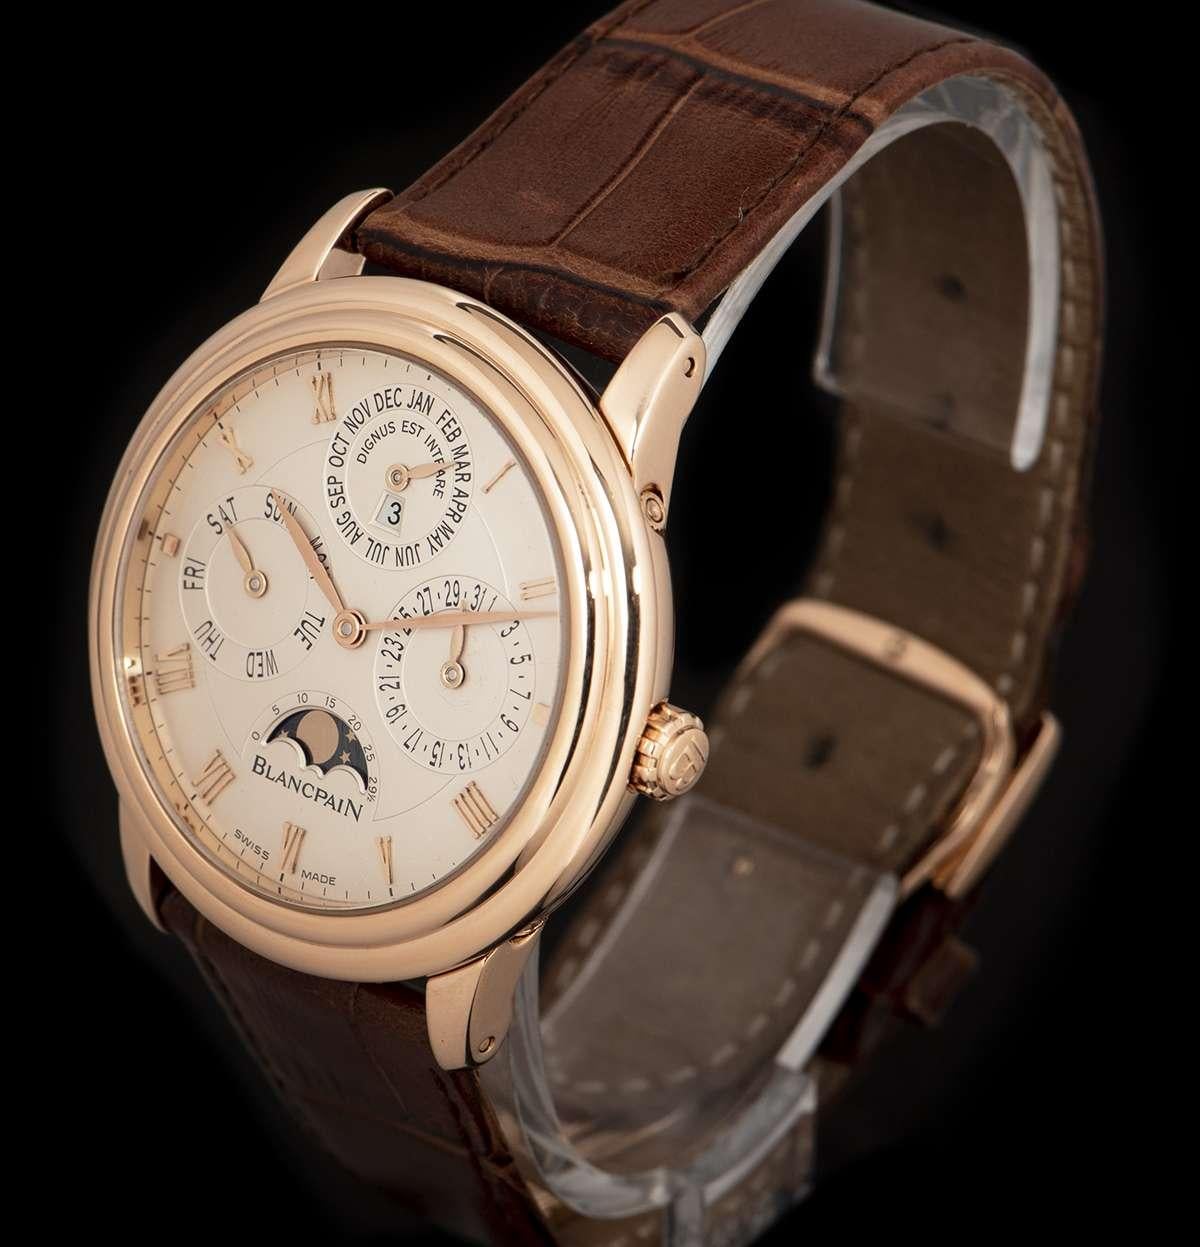 An 18k Rose Gold Leman Villeret Perpetual Calendar Gents Wristwatch, silver dial with applied roman numerals, date sub-dial at 3 0'clock, moonphase and power reserve indicator at 6 0'clock, weekday sub-dial at 9 0'clock, month and leap year sub-dial